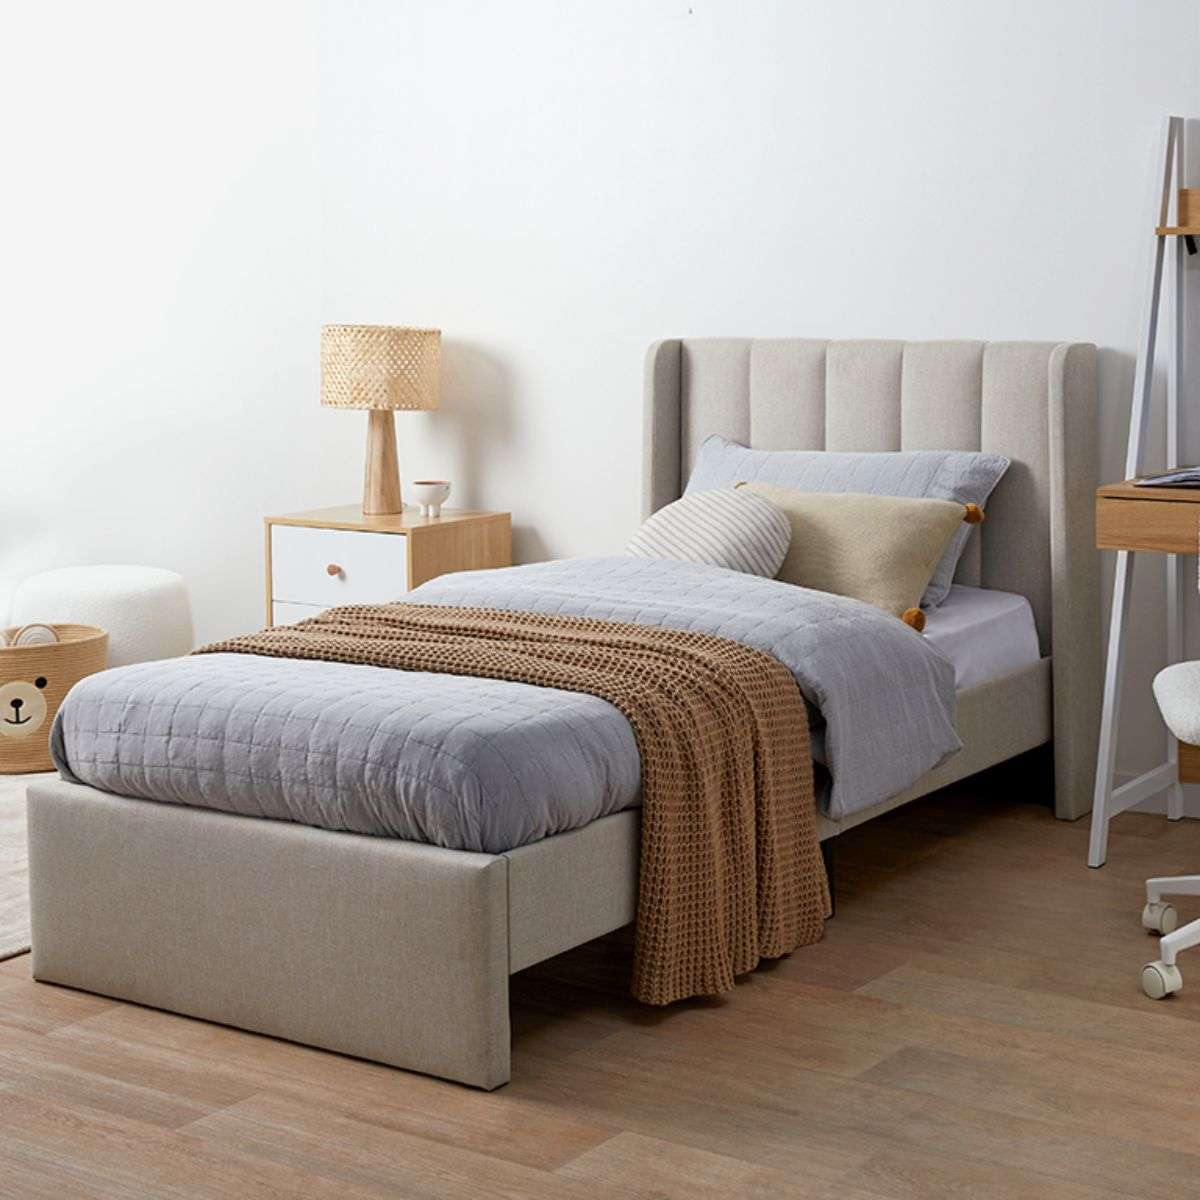 Quinn Double Bed - Natural